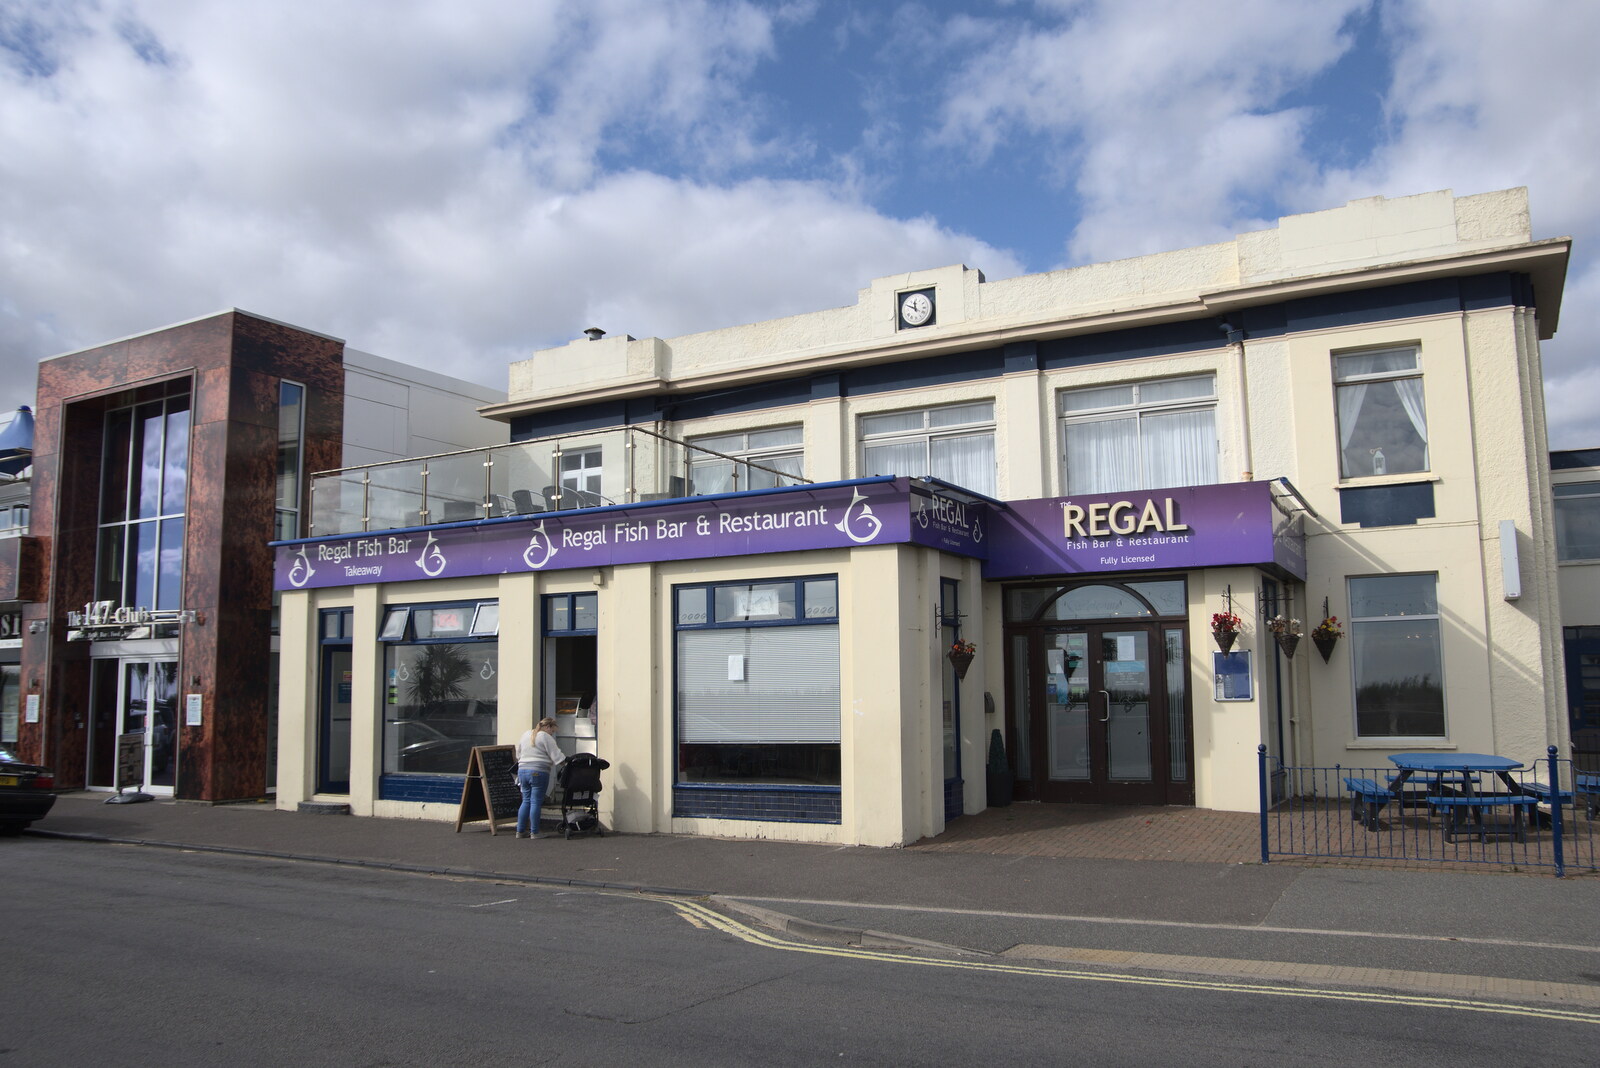 A Postcard from Felixstowe, Suffolk - 5th October 2022: The 1930s Regal fish bar's clock is actually right